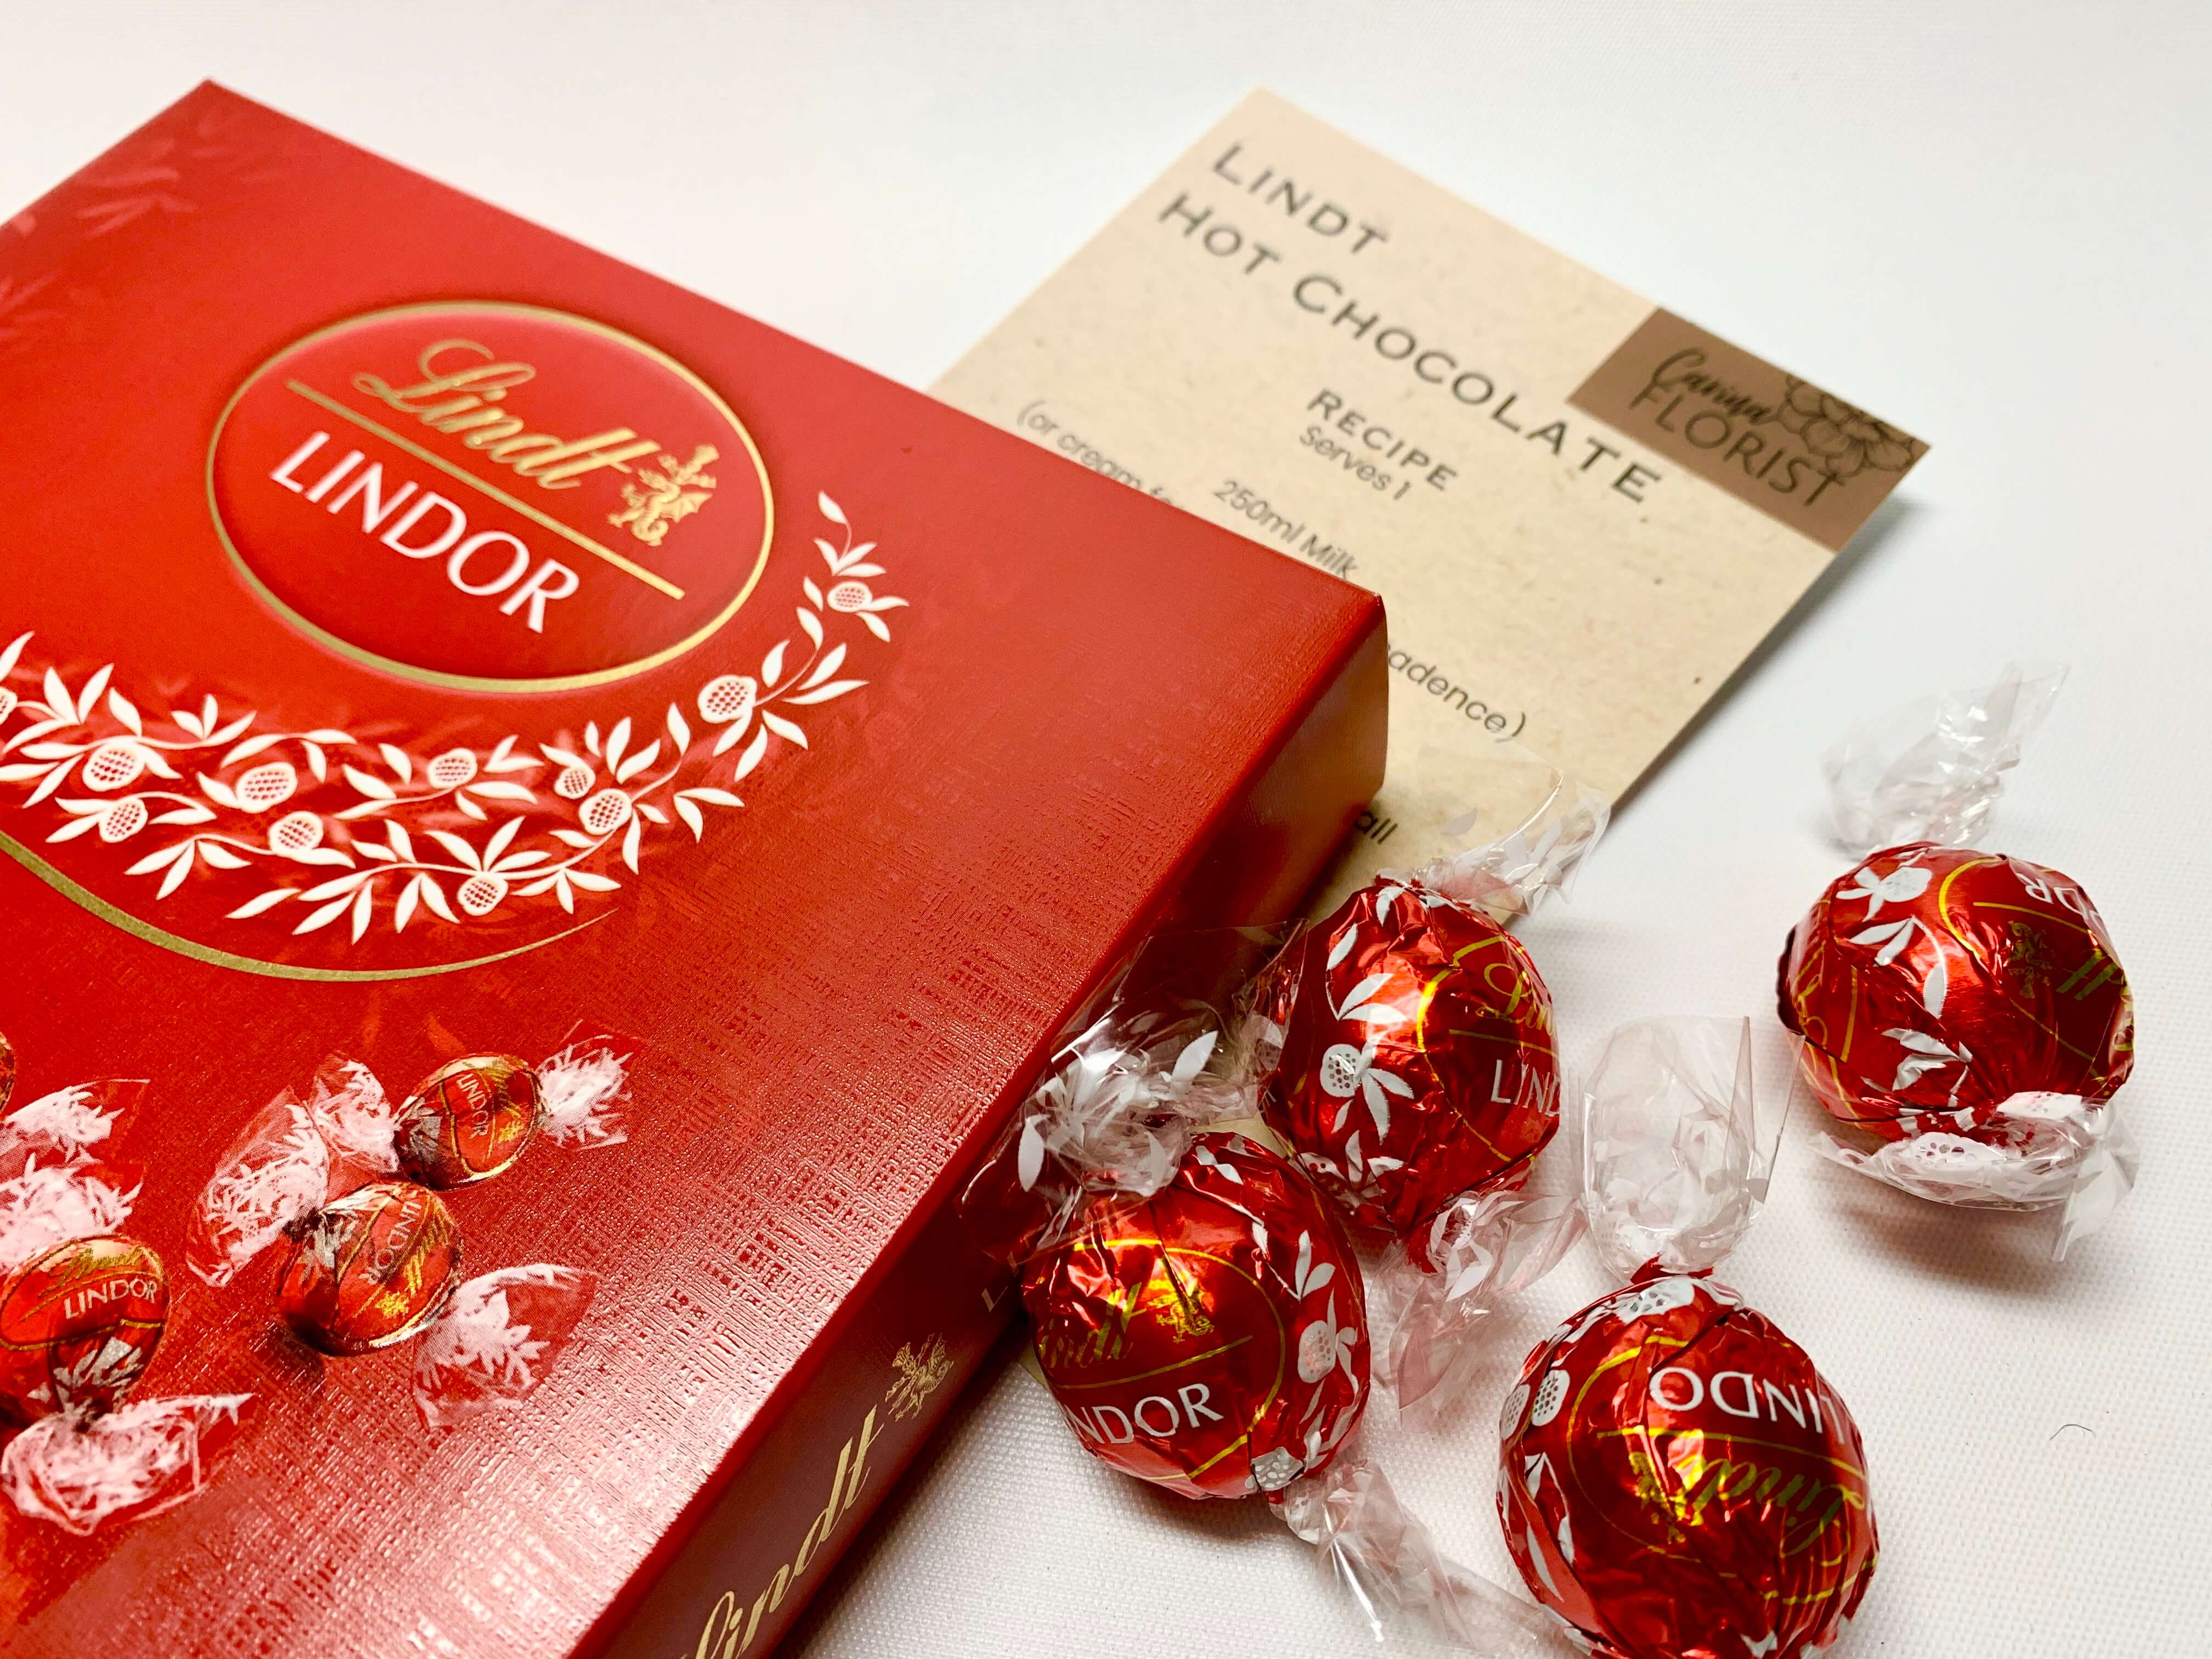 Lindt Hot Chocolate Gift